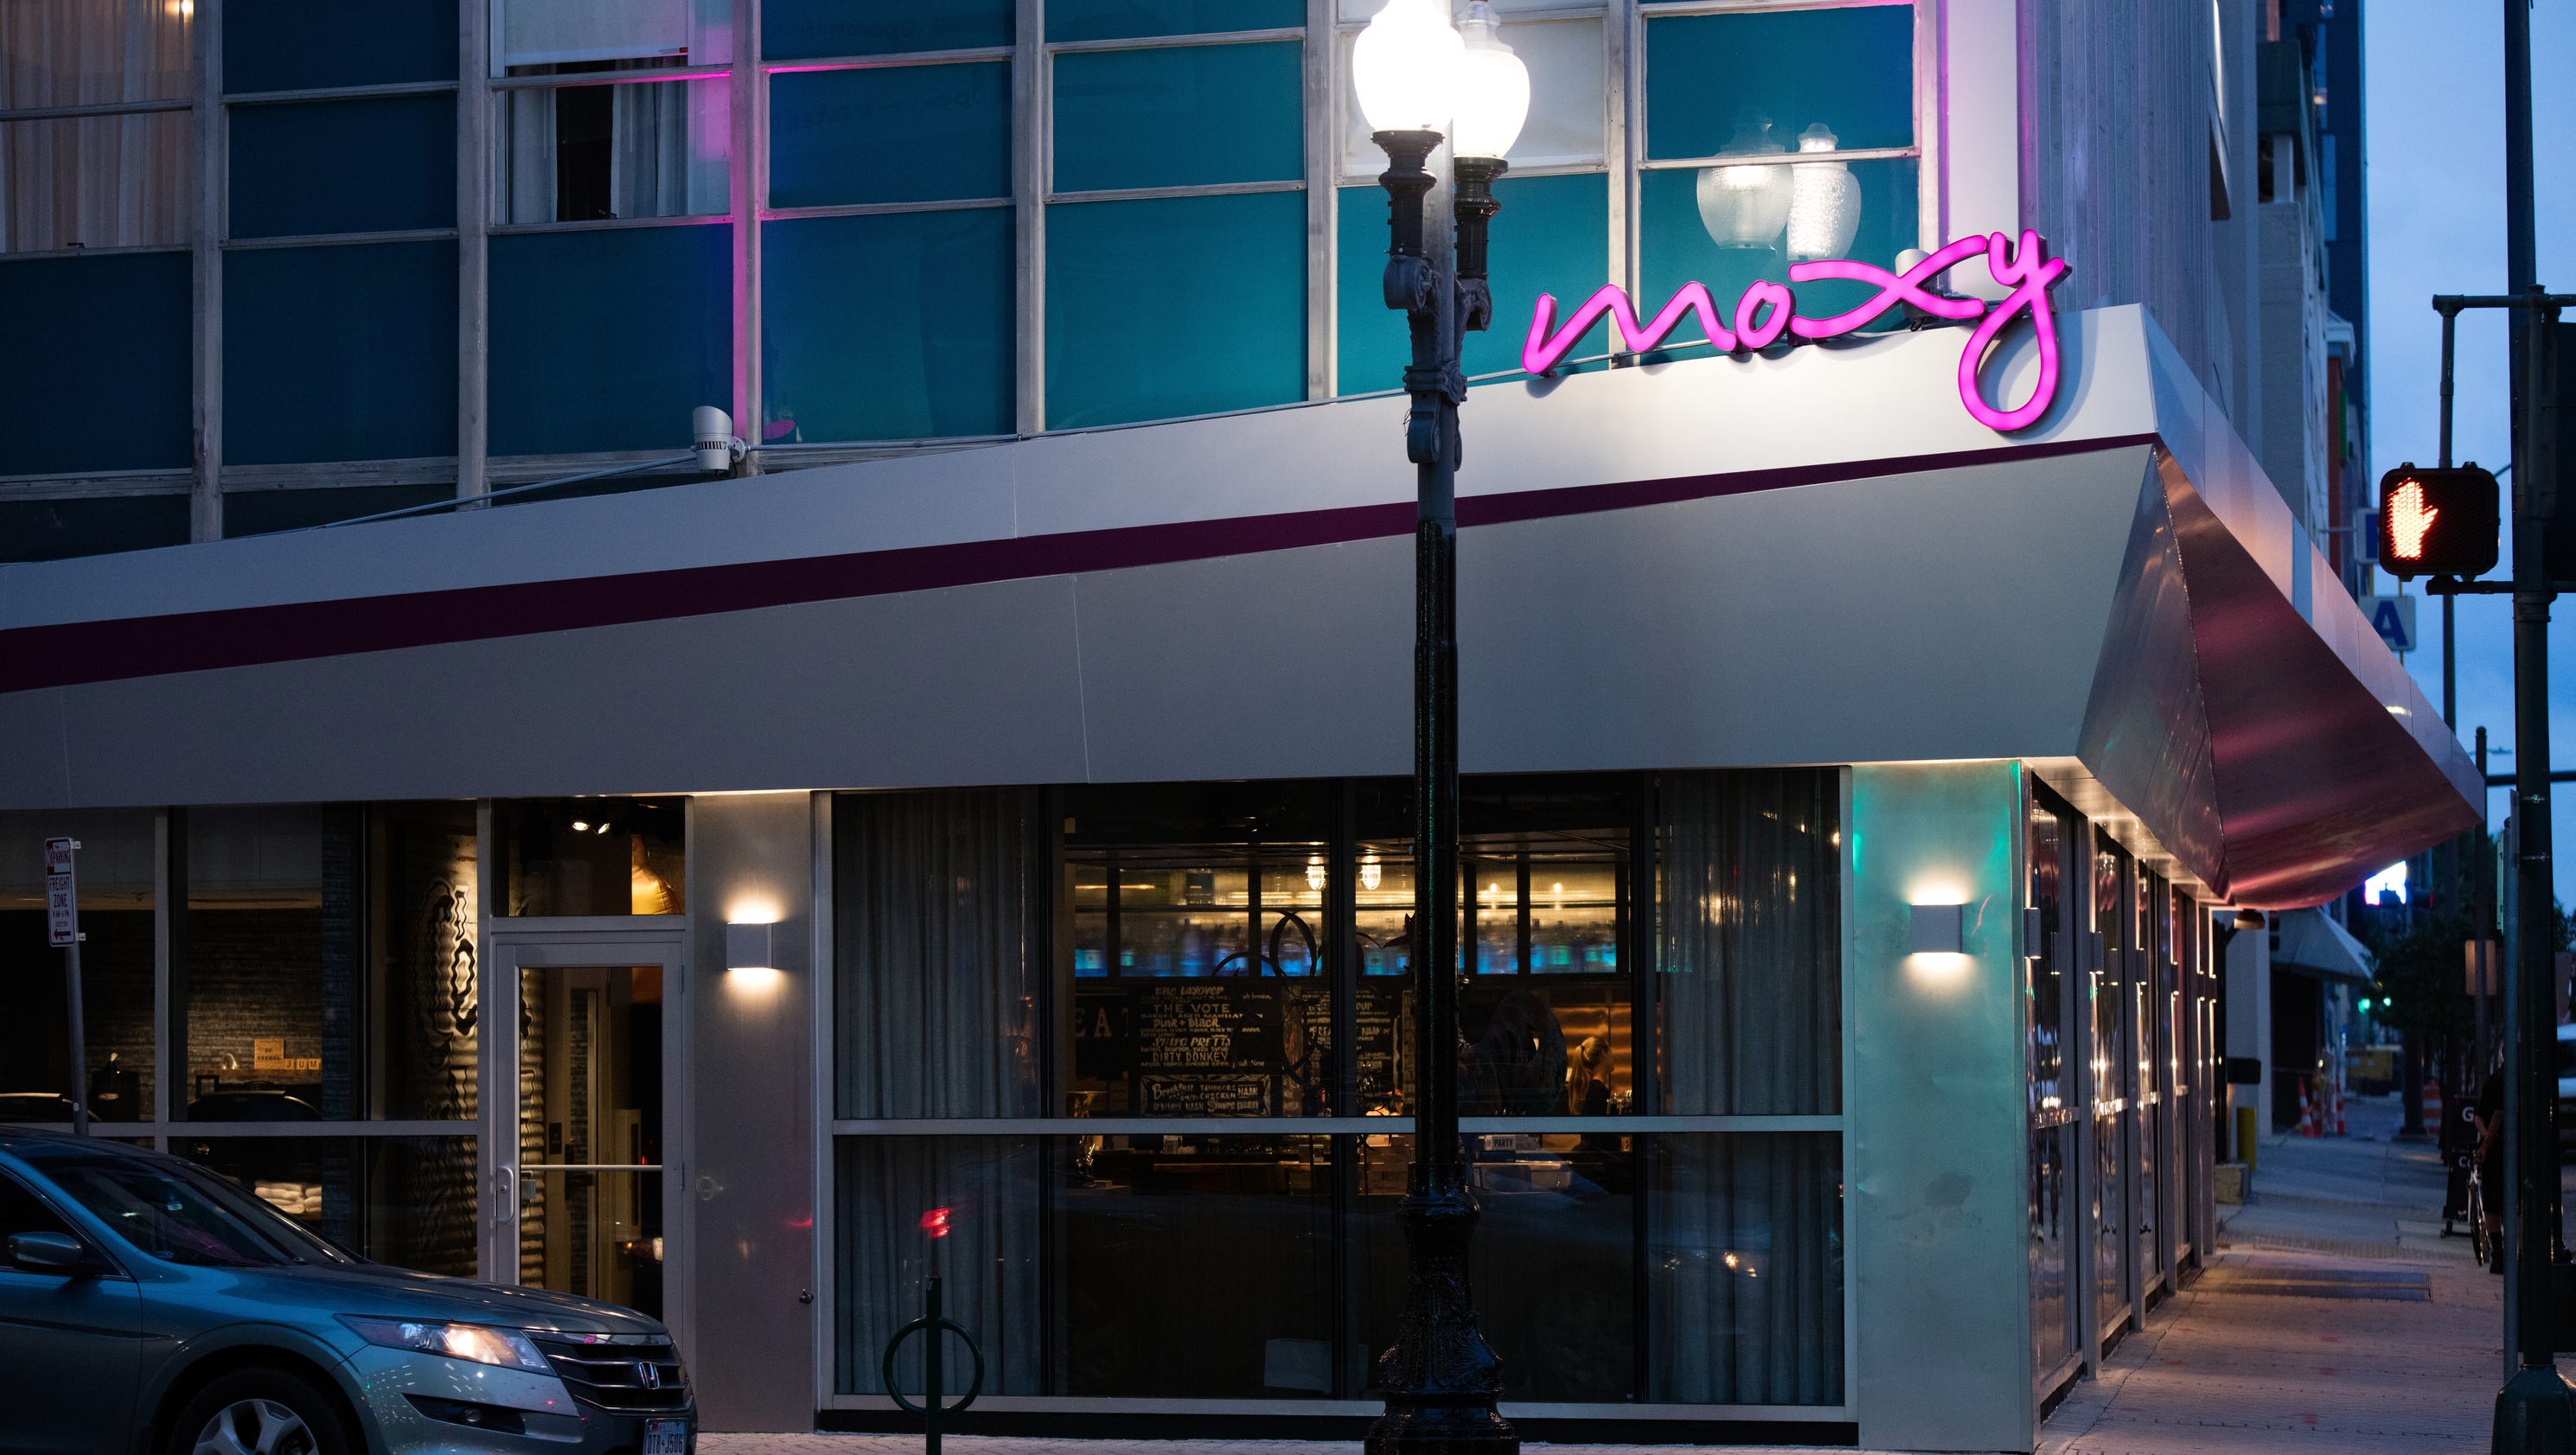 First look at Marriott's new Moxy hotel brand in New Orleans